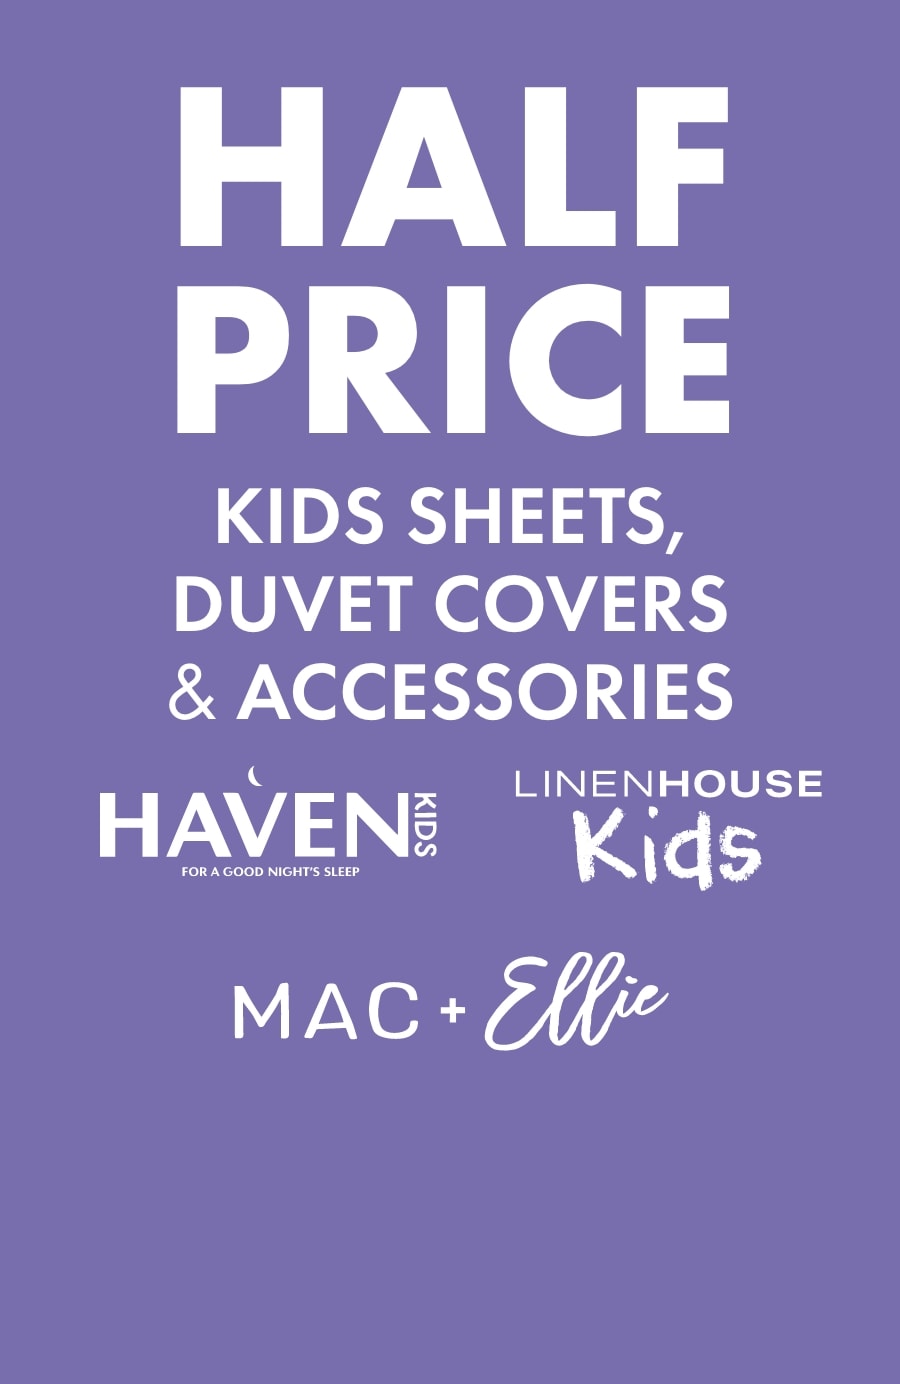 Half Price Kids Sheets, Duvet Covers & Accessories 